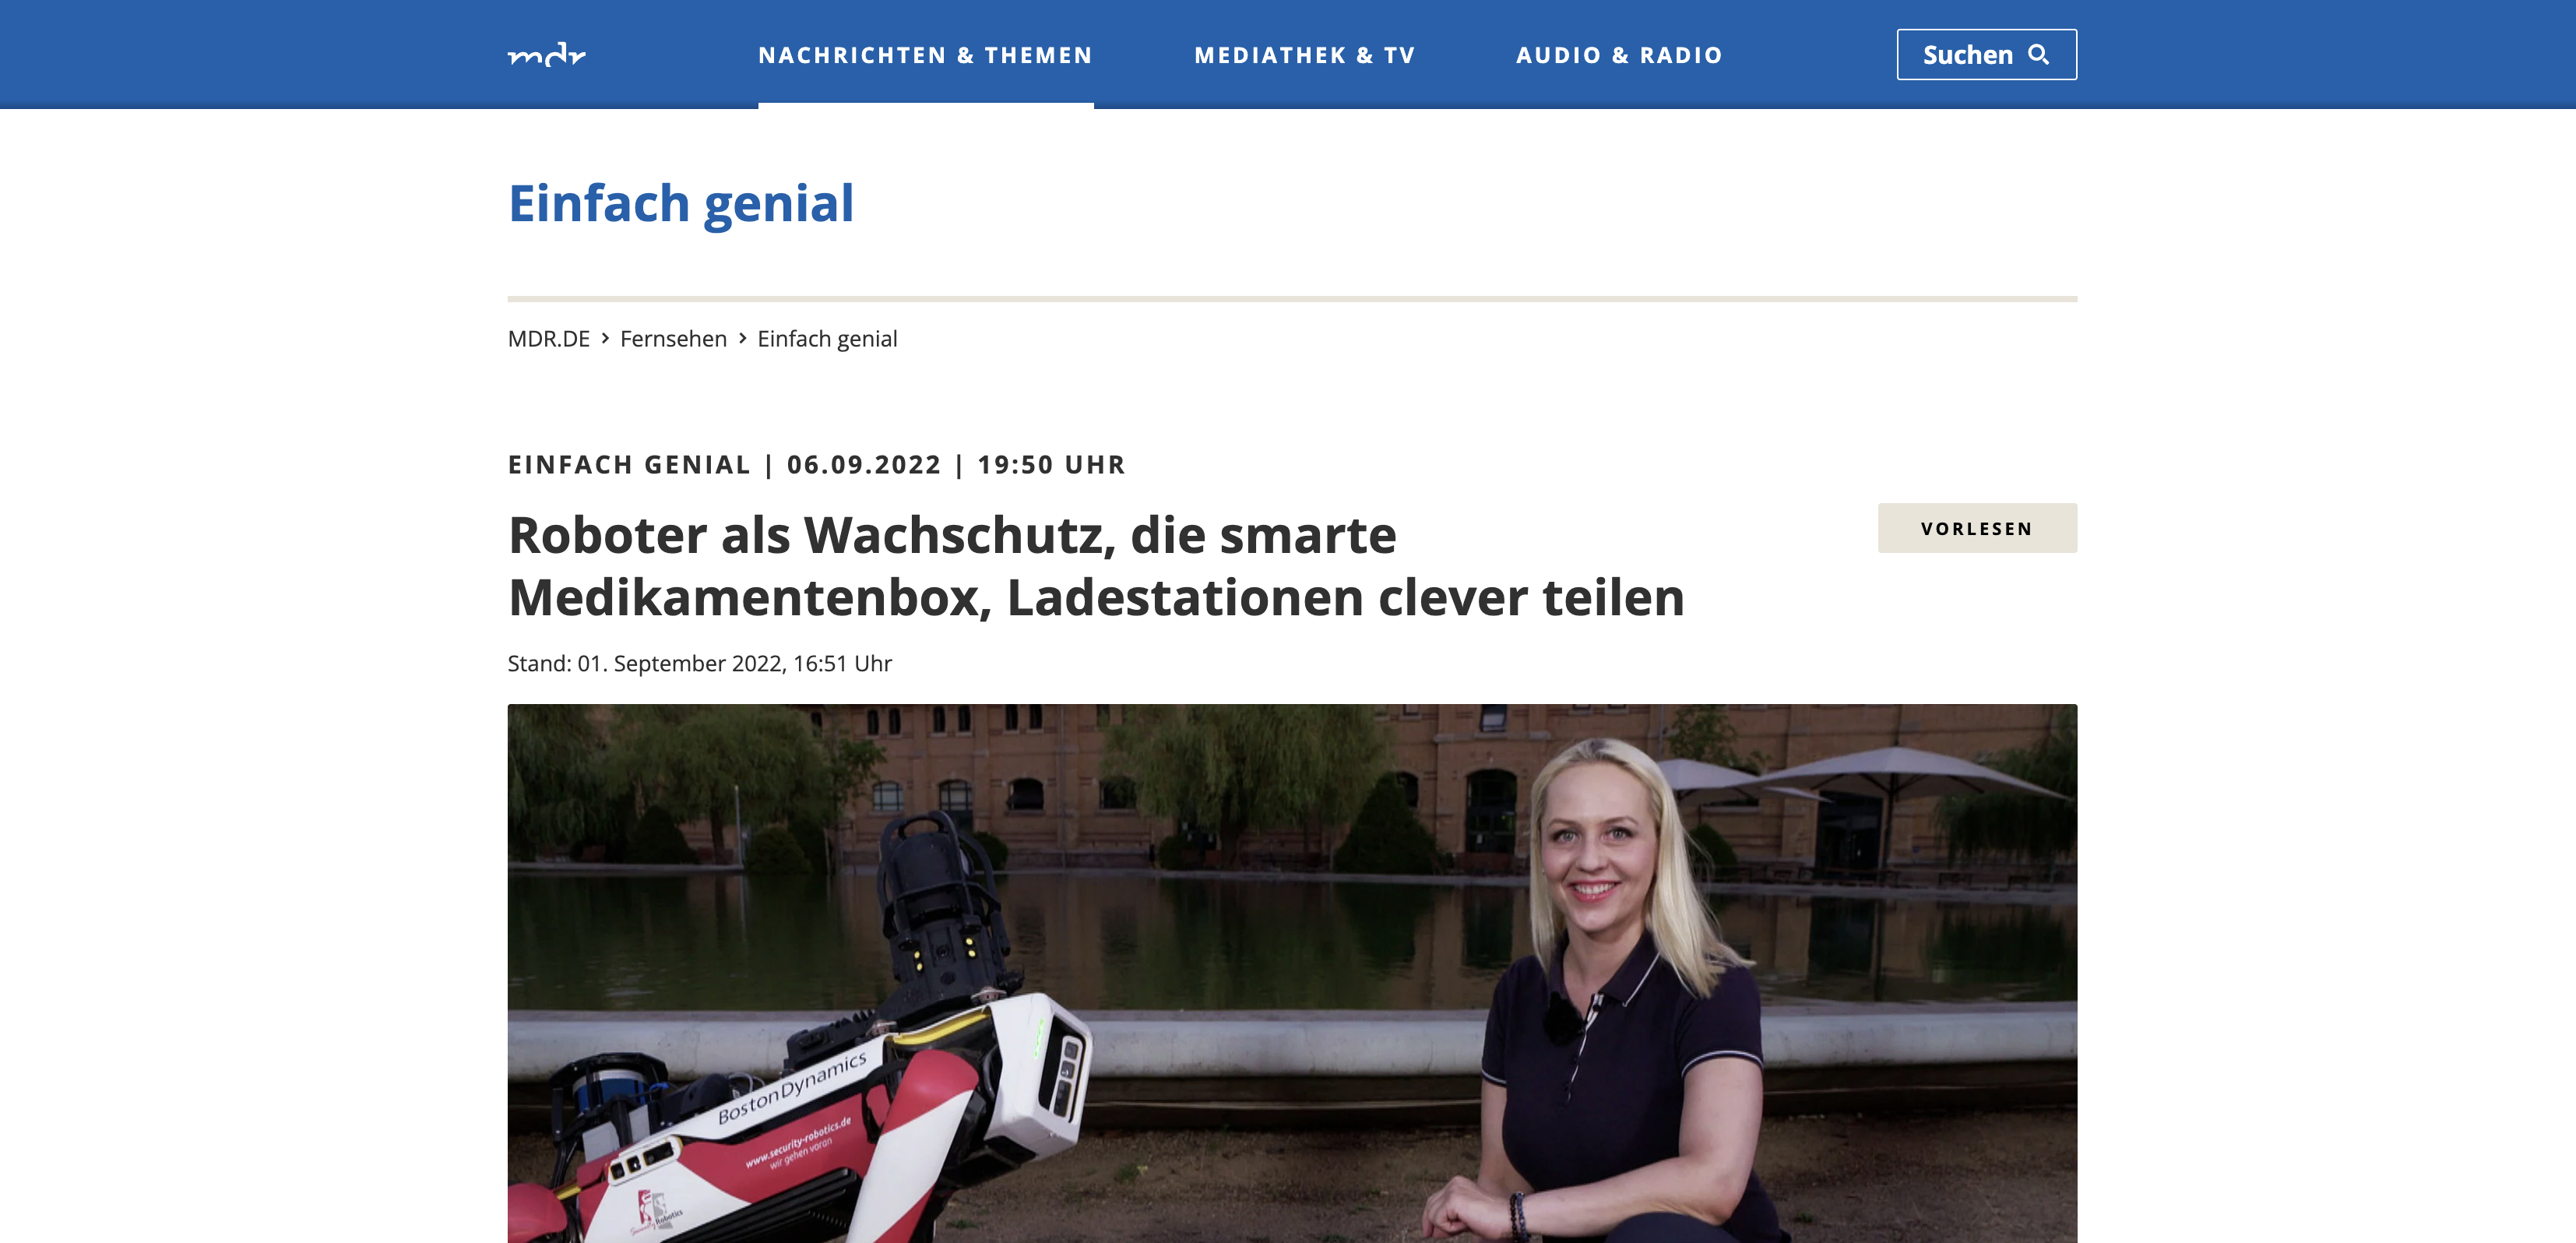 Article about the Einfach Genial show